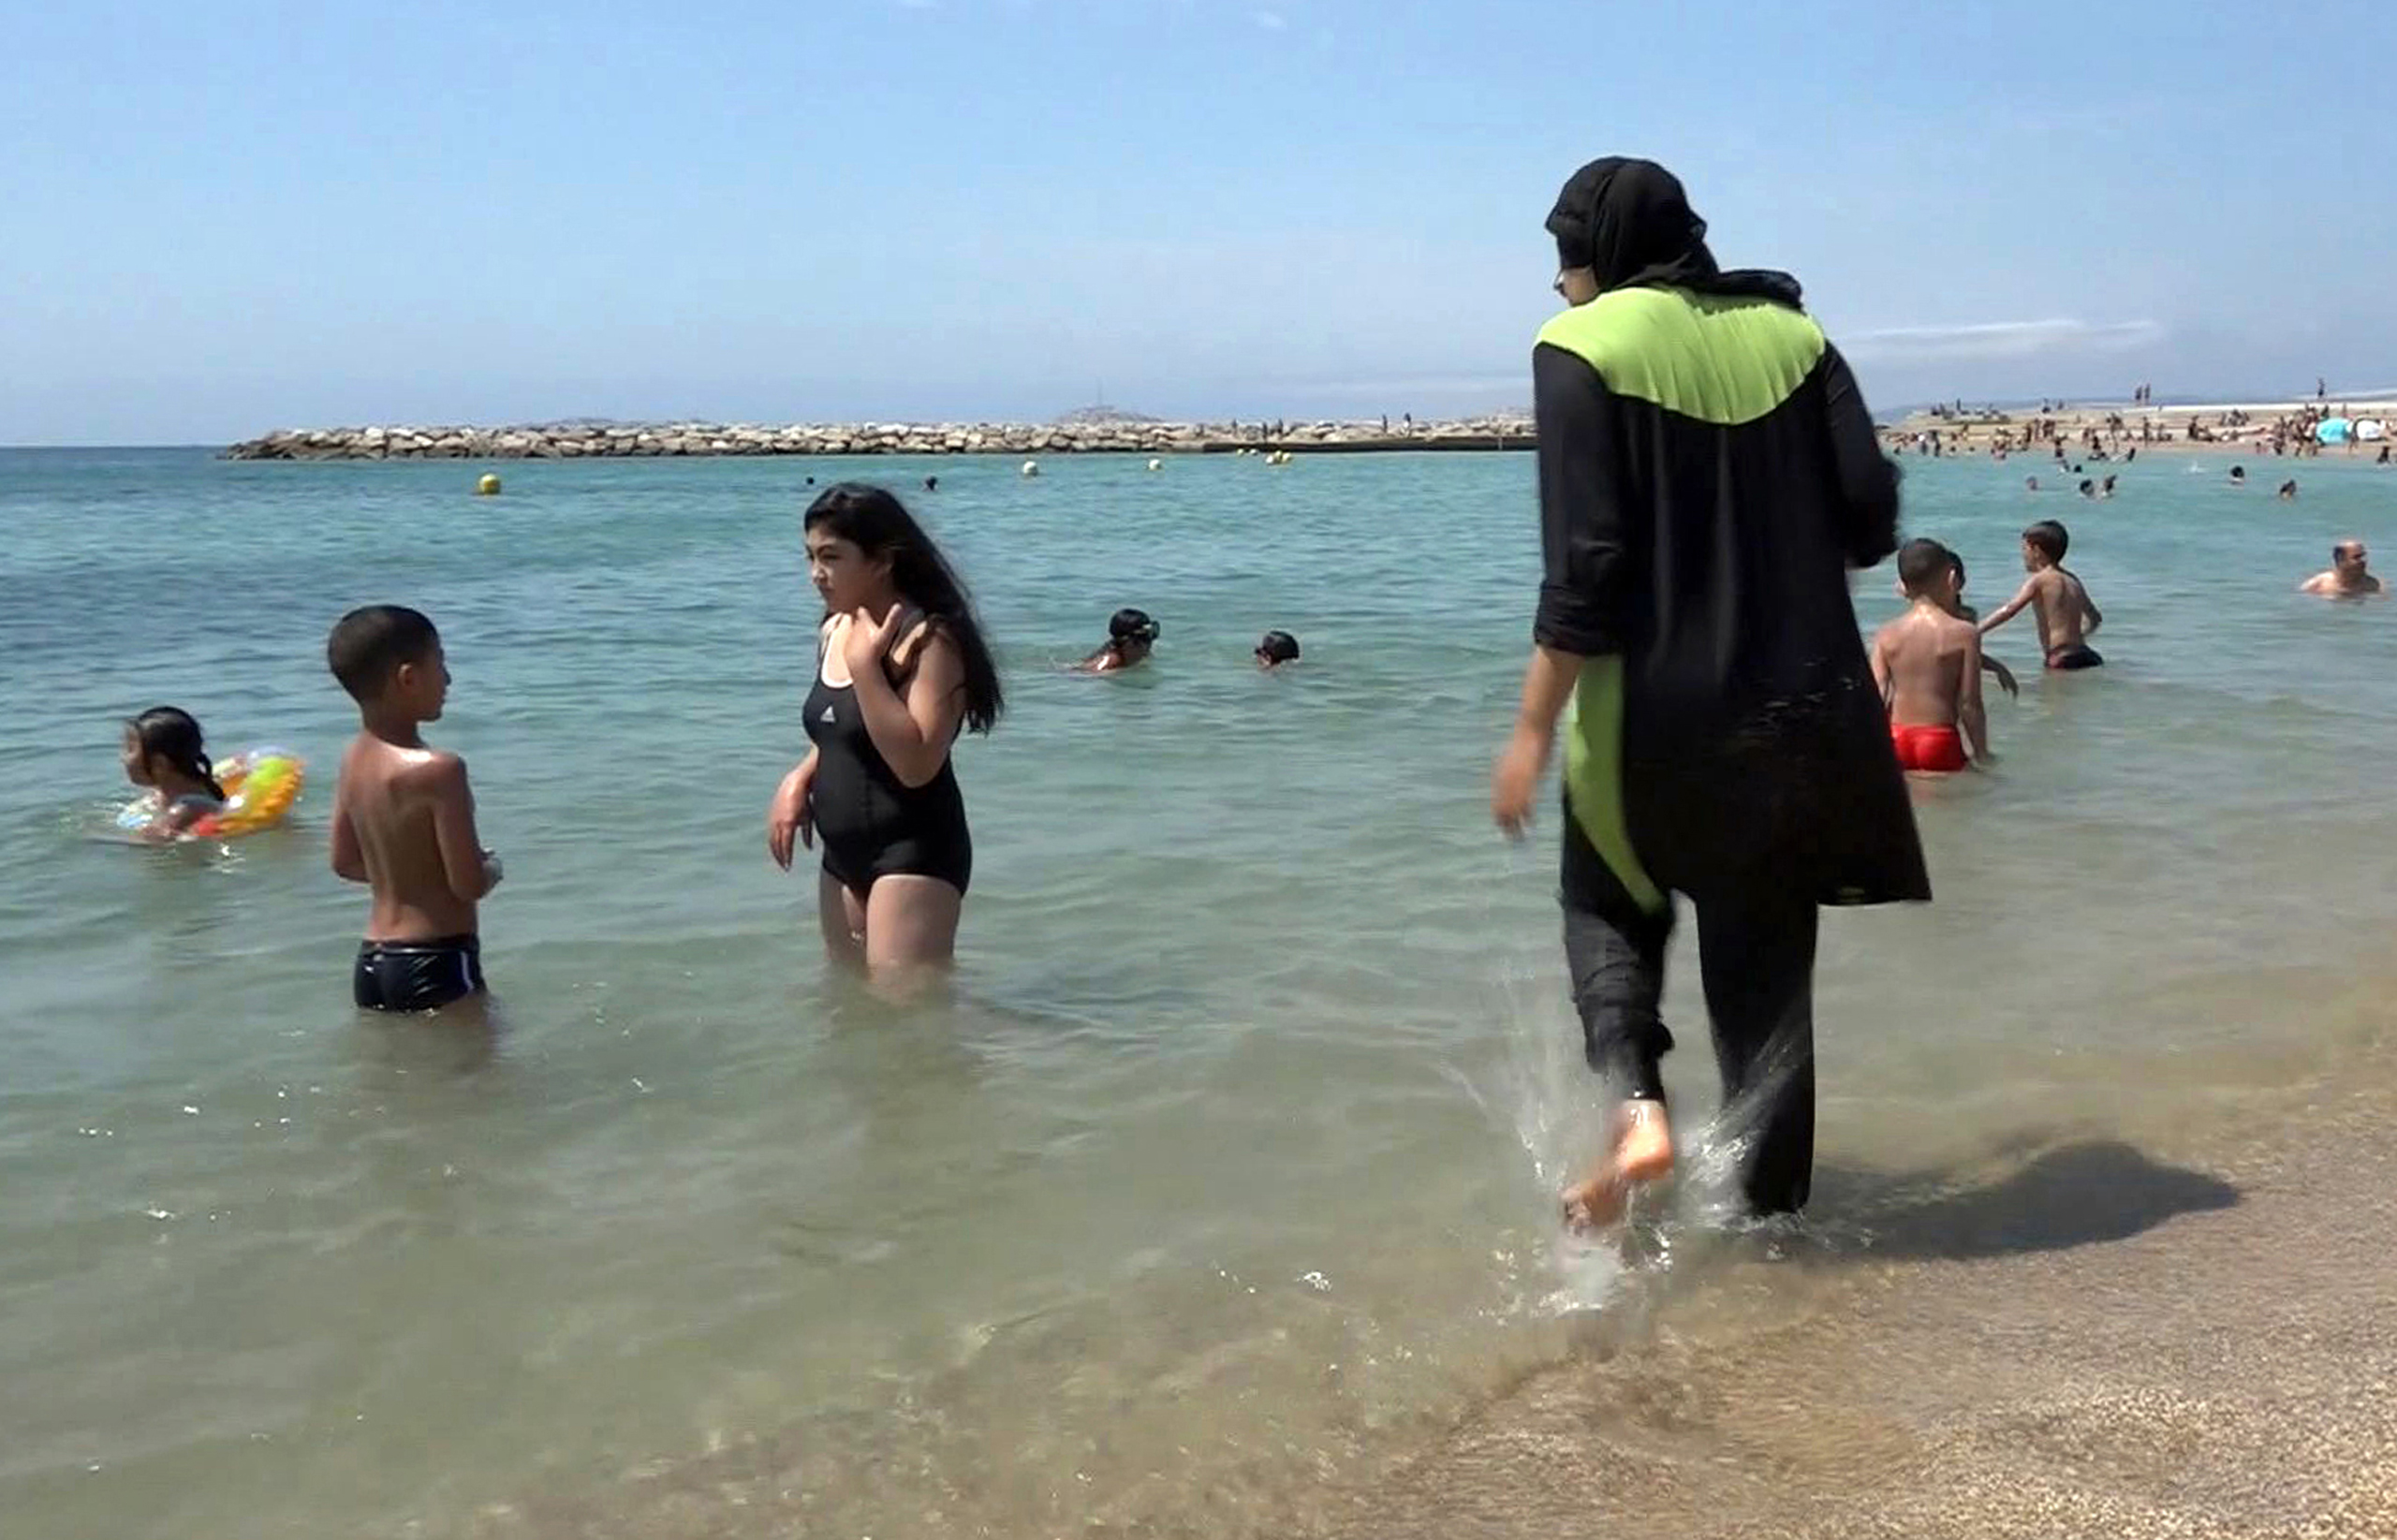 Nissrine Samali, 20, gets into the sea wearing a burkini, a wetsuit-like garment that also covers the head, in Marseille, southern France, on Aug. 4, 2016. (AP&mdash;AP)